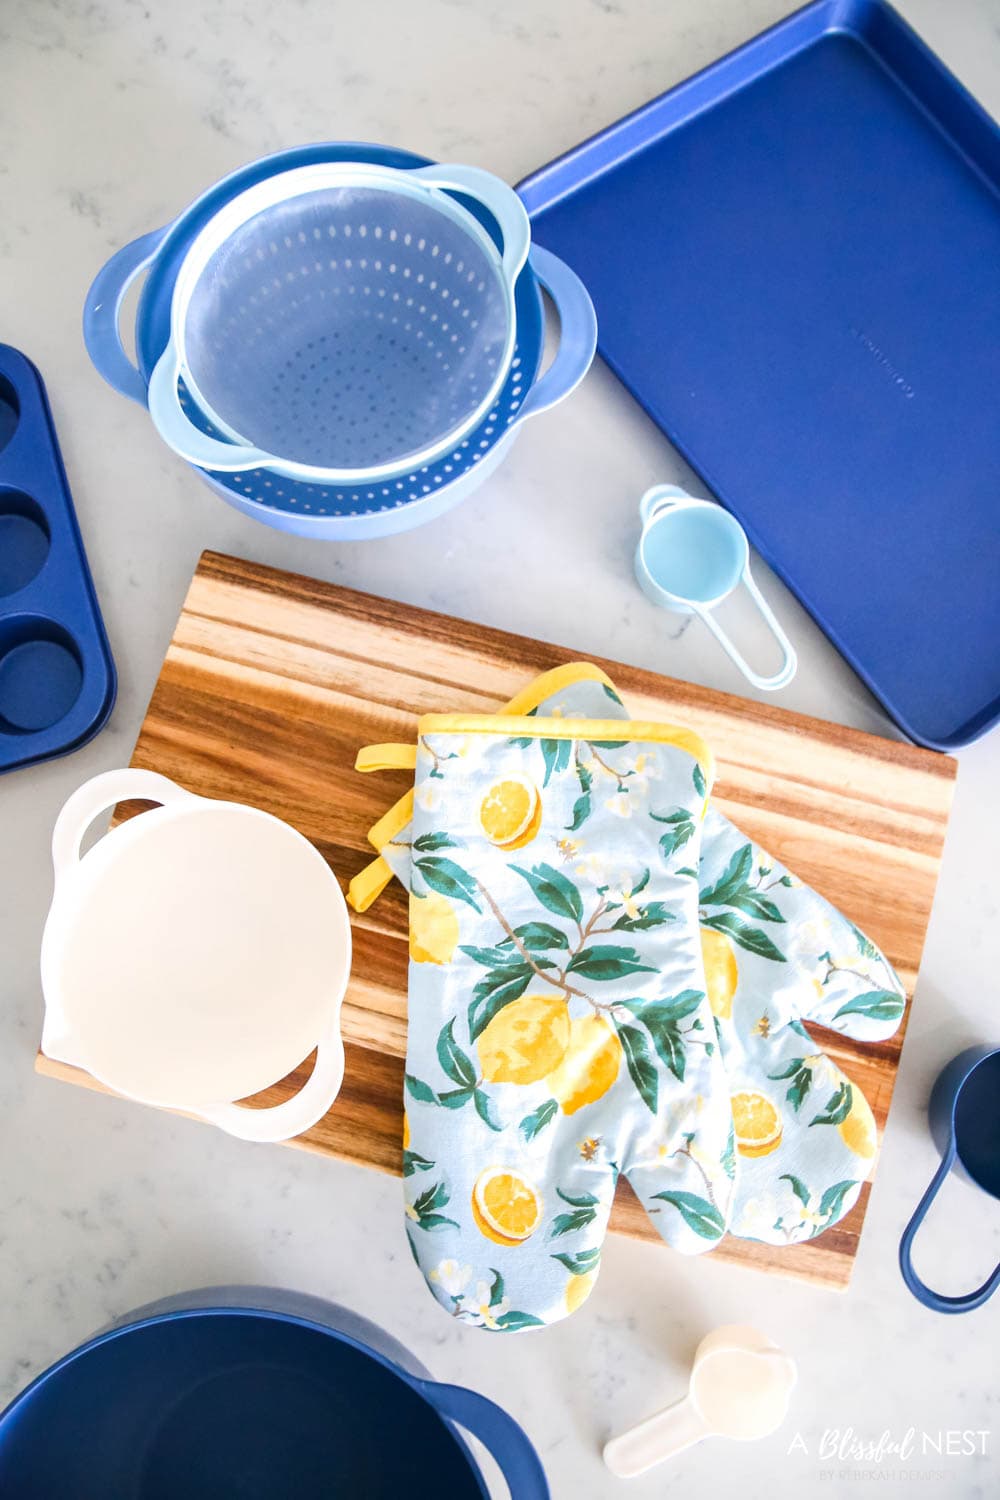 Love these affordable kitchen items for baking and cooking in shades of blue with citrus accents from Walmart. #ABlissfulNest #WalmartHome #sponsored #kitchen #baking